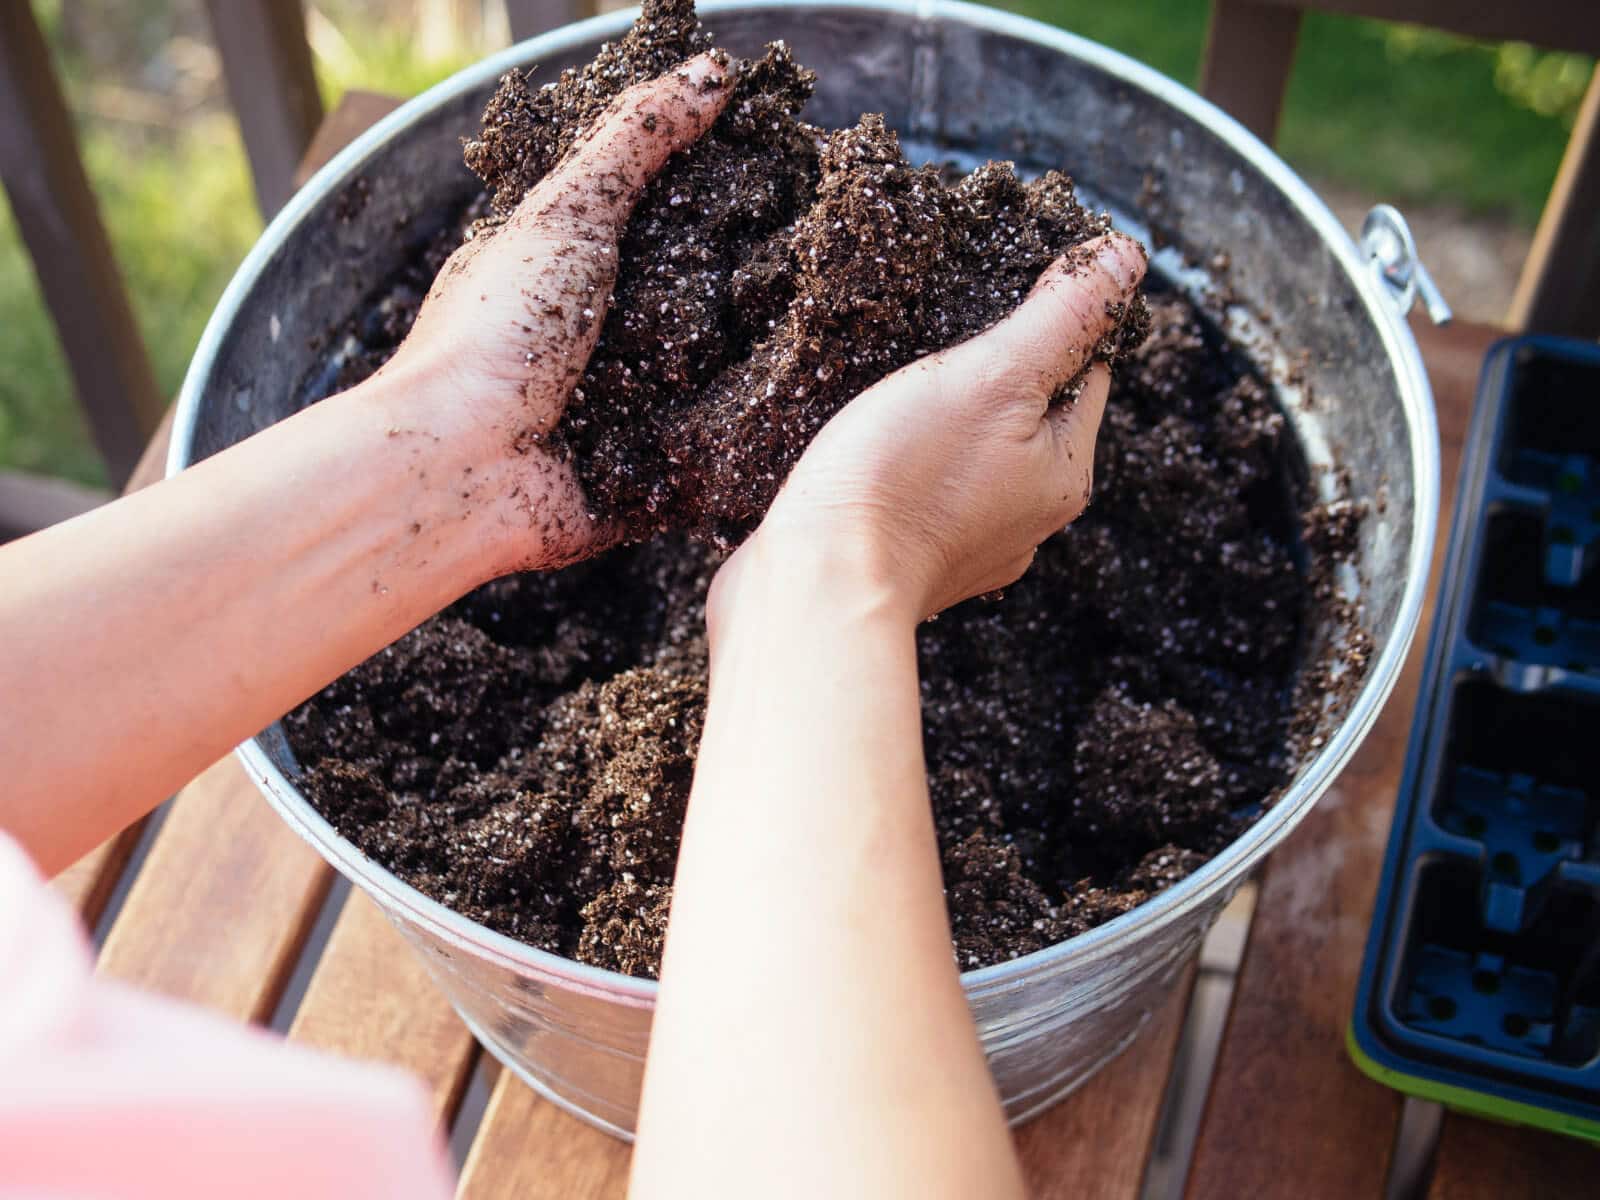 Consider easy, more sustainable alternatives to peat moss